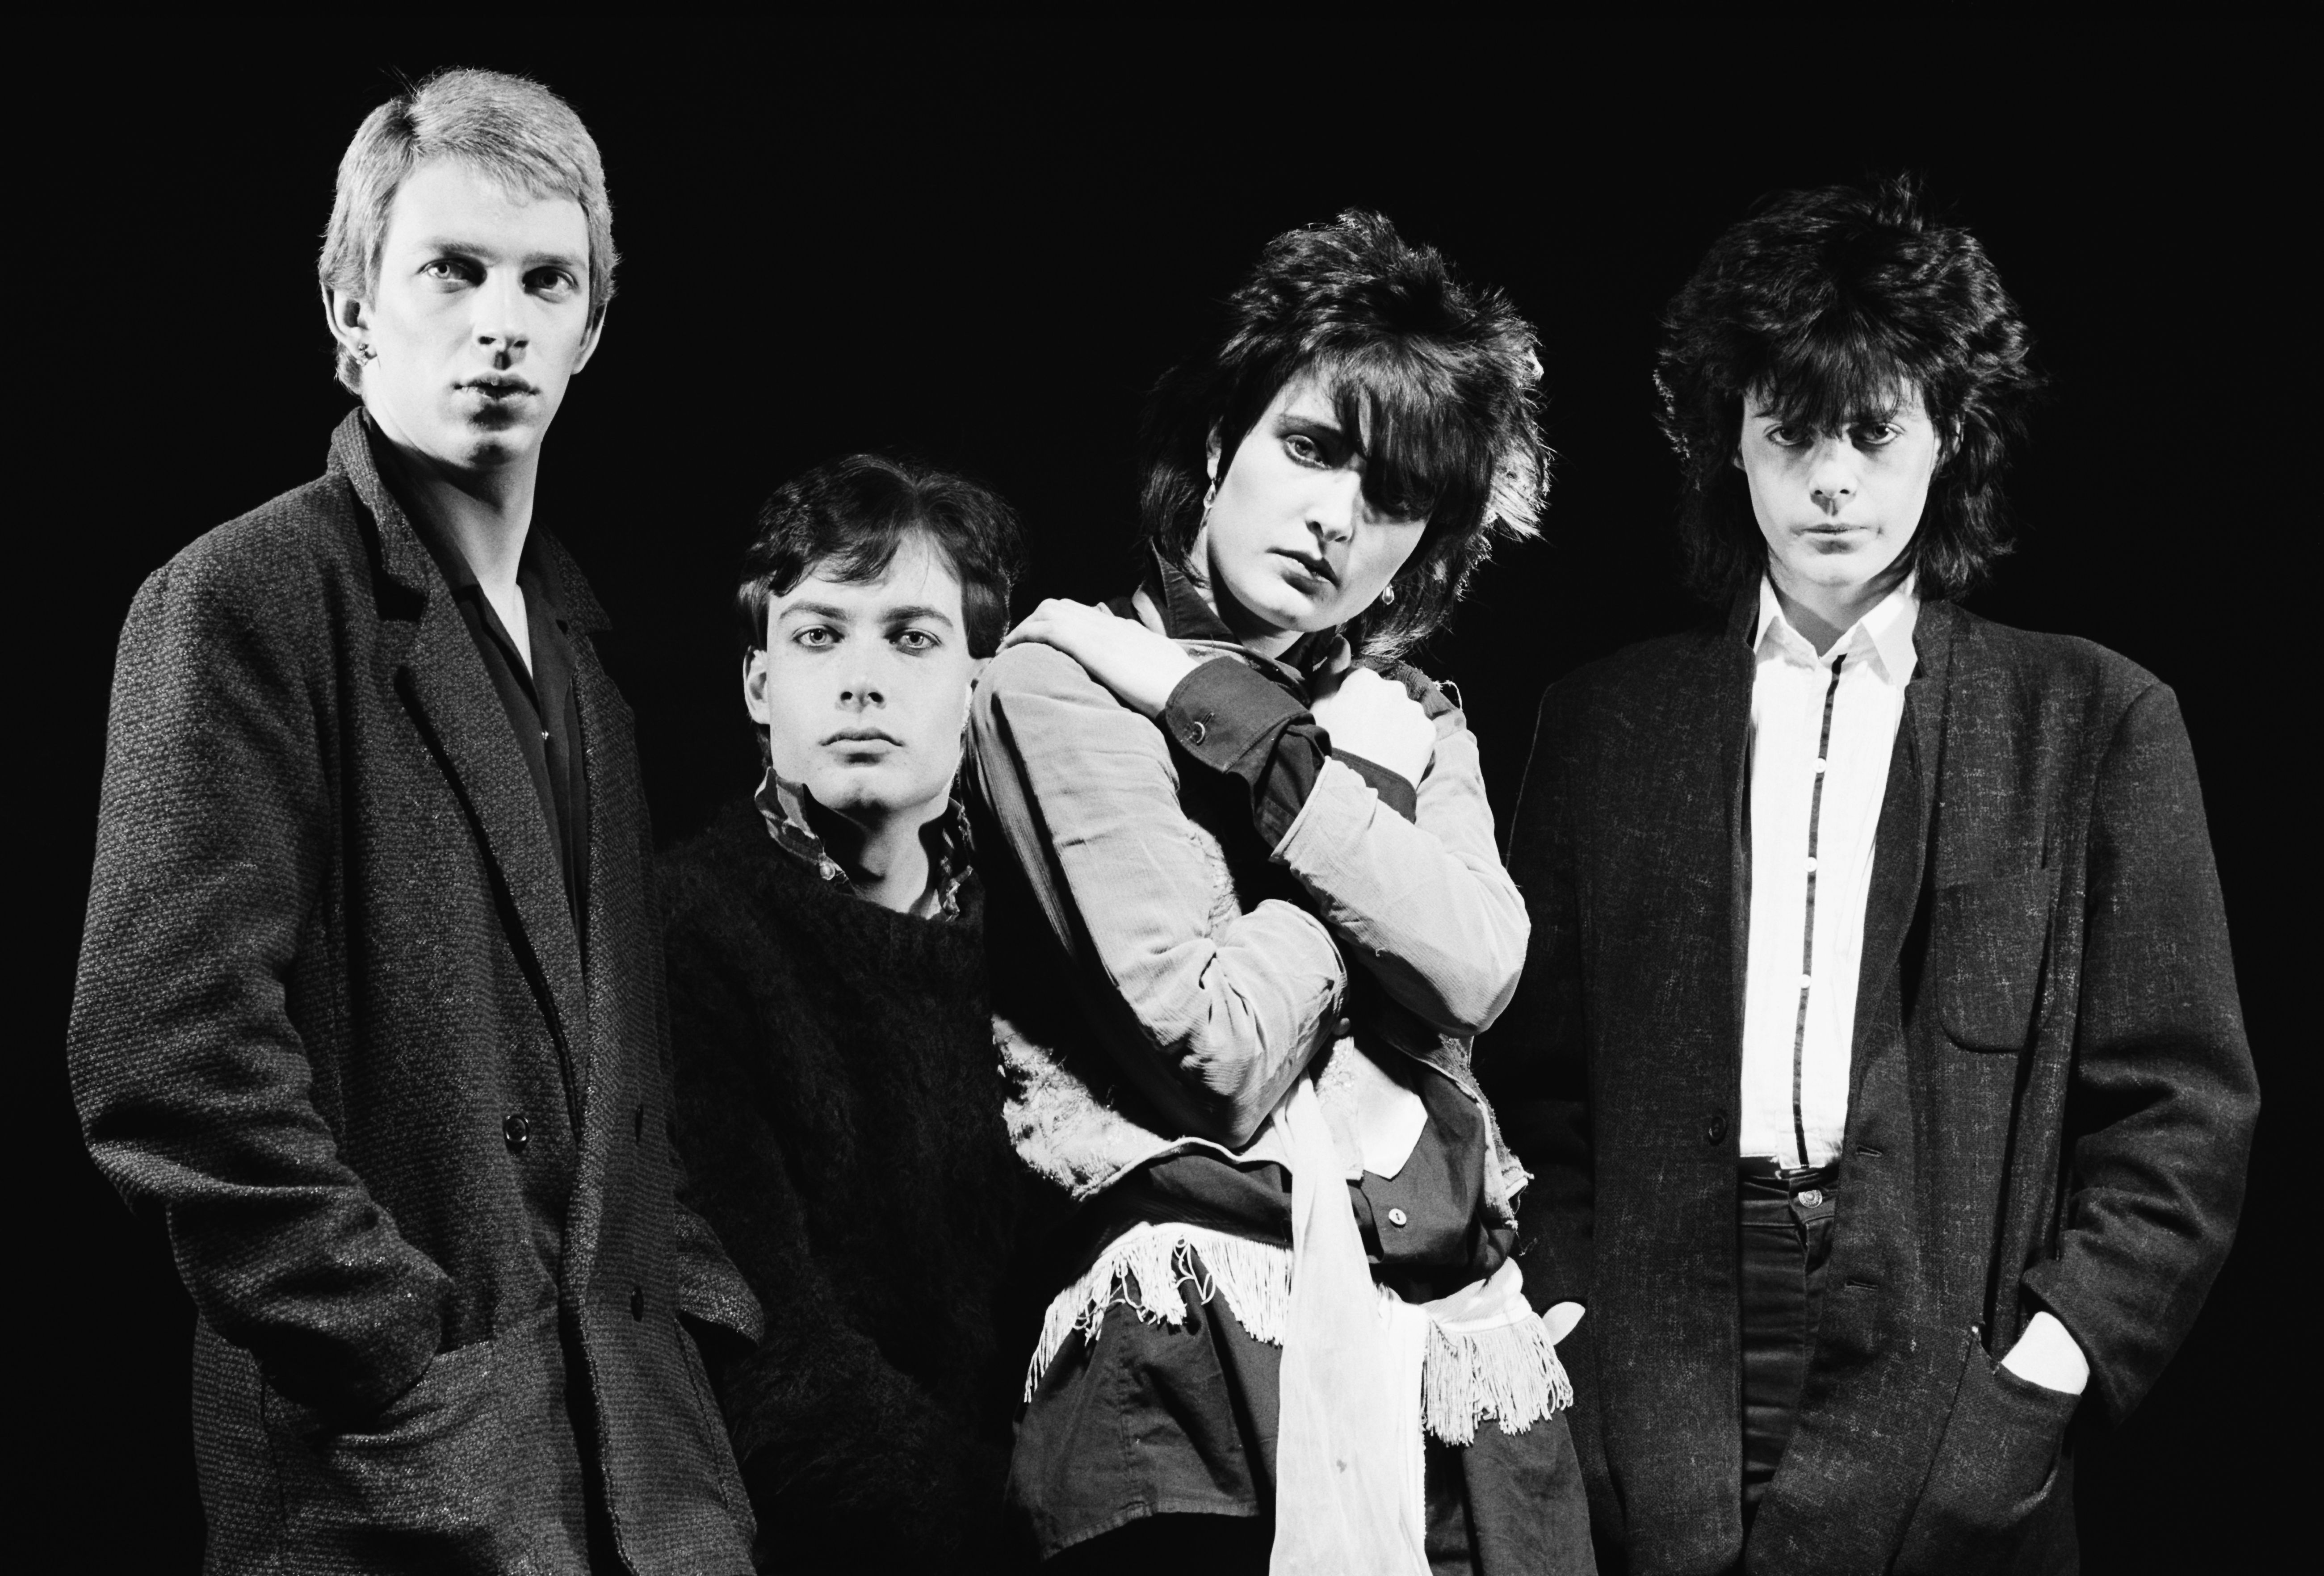 Siouxsie and the Banshees: Our 1986 Interview